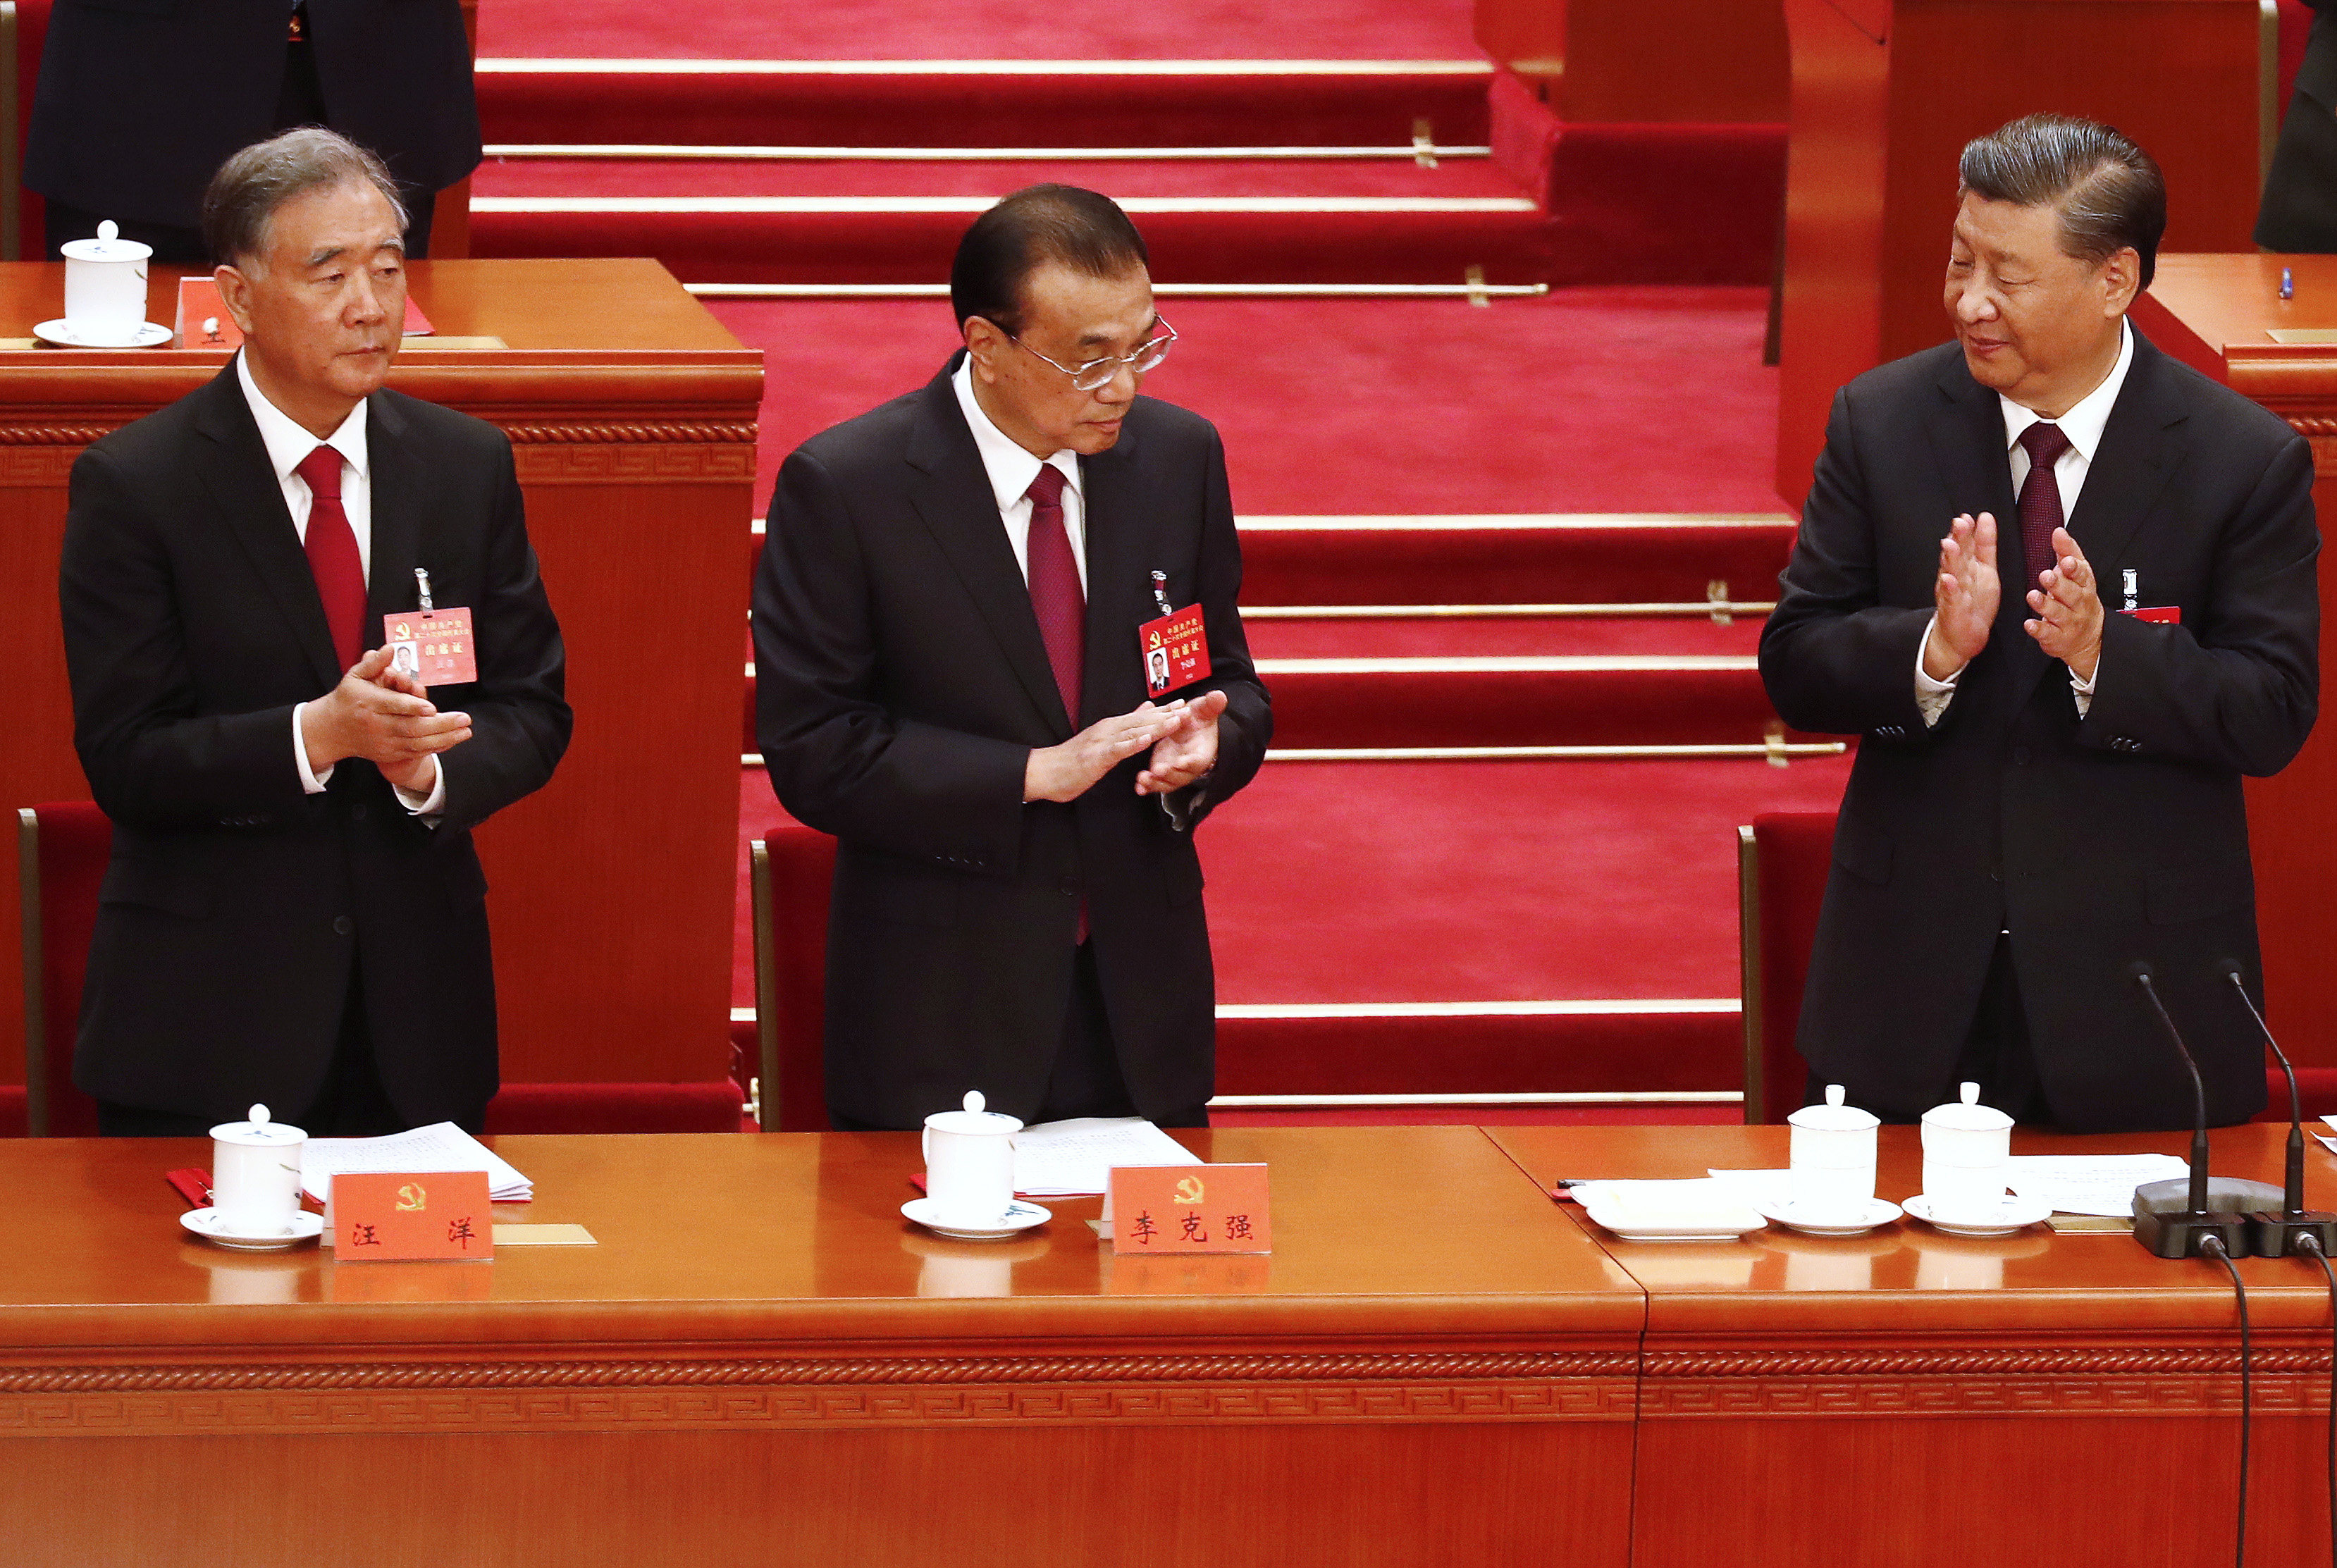 CPPCC chairman Wang Yang (left) and Premier Li Keqiang (centre) will not be part of President Xi Jinping’s core team for the next five years. Photo: EPA-EFE